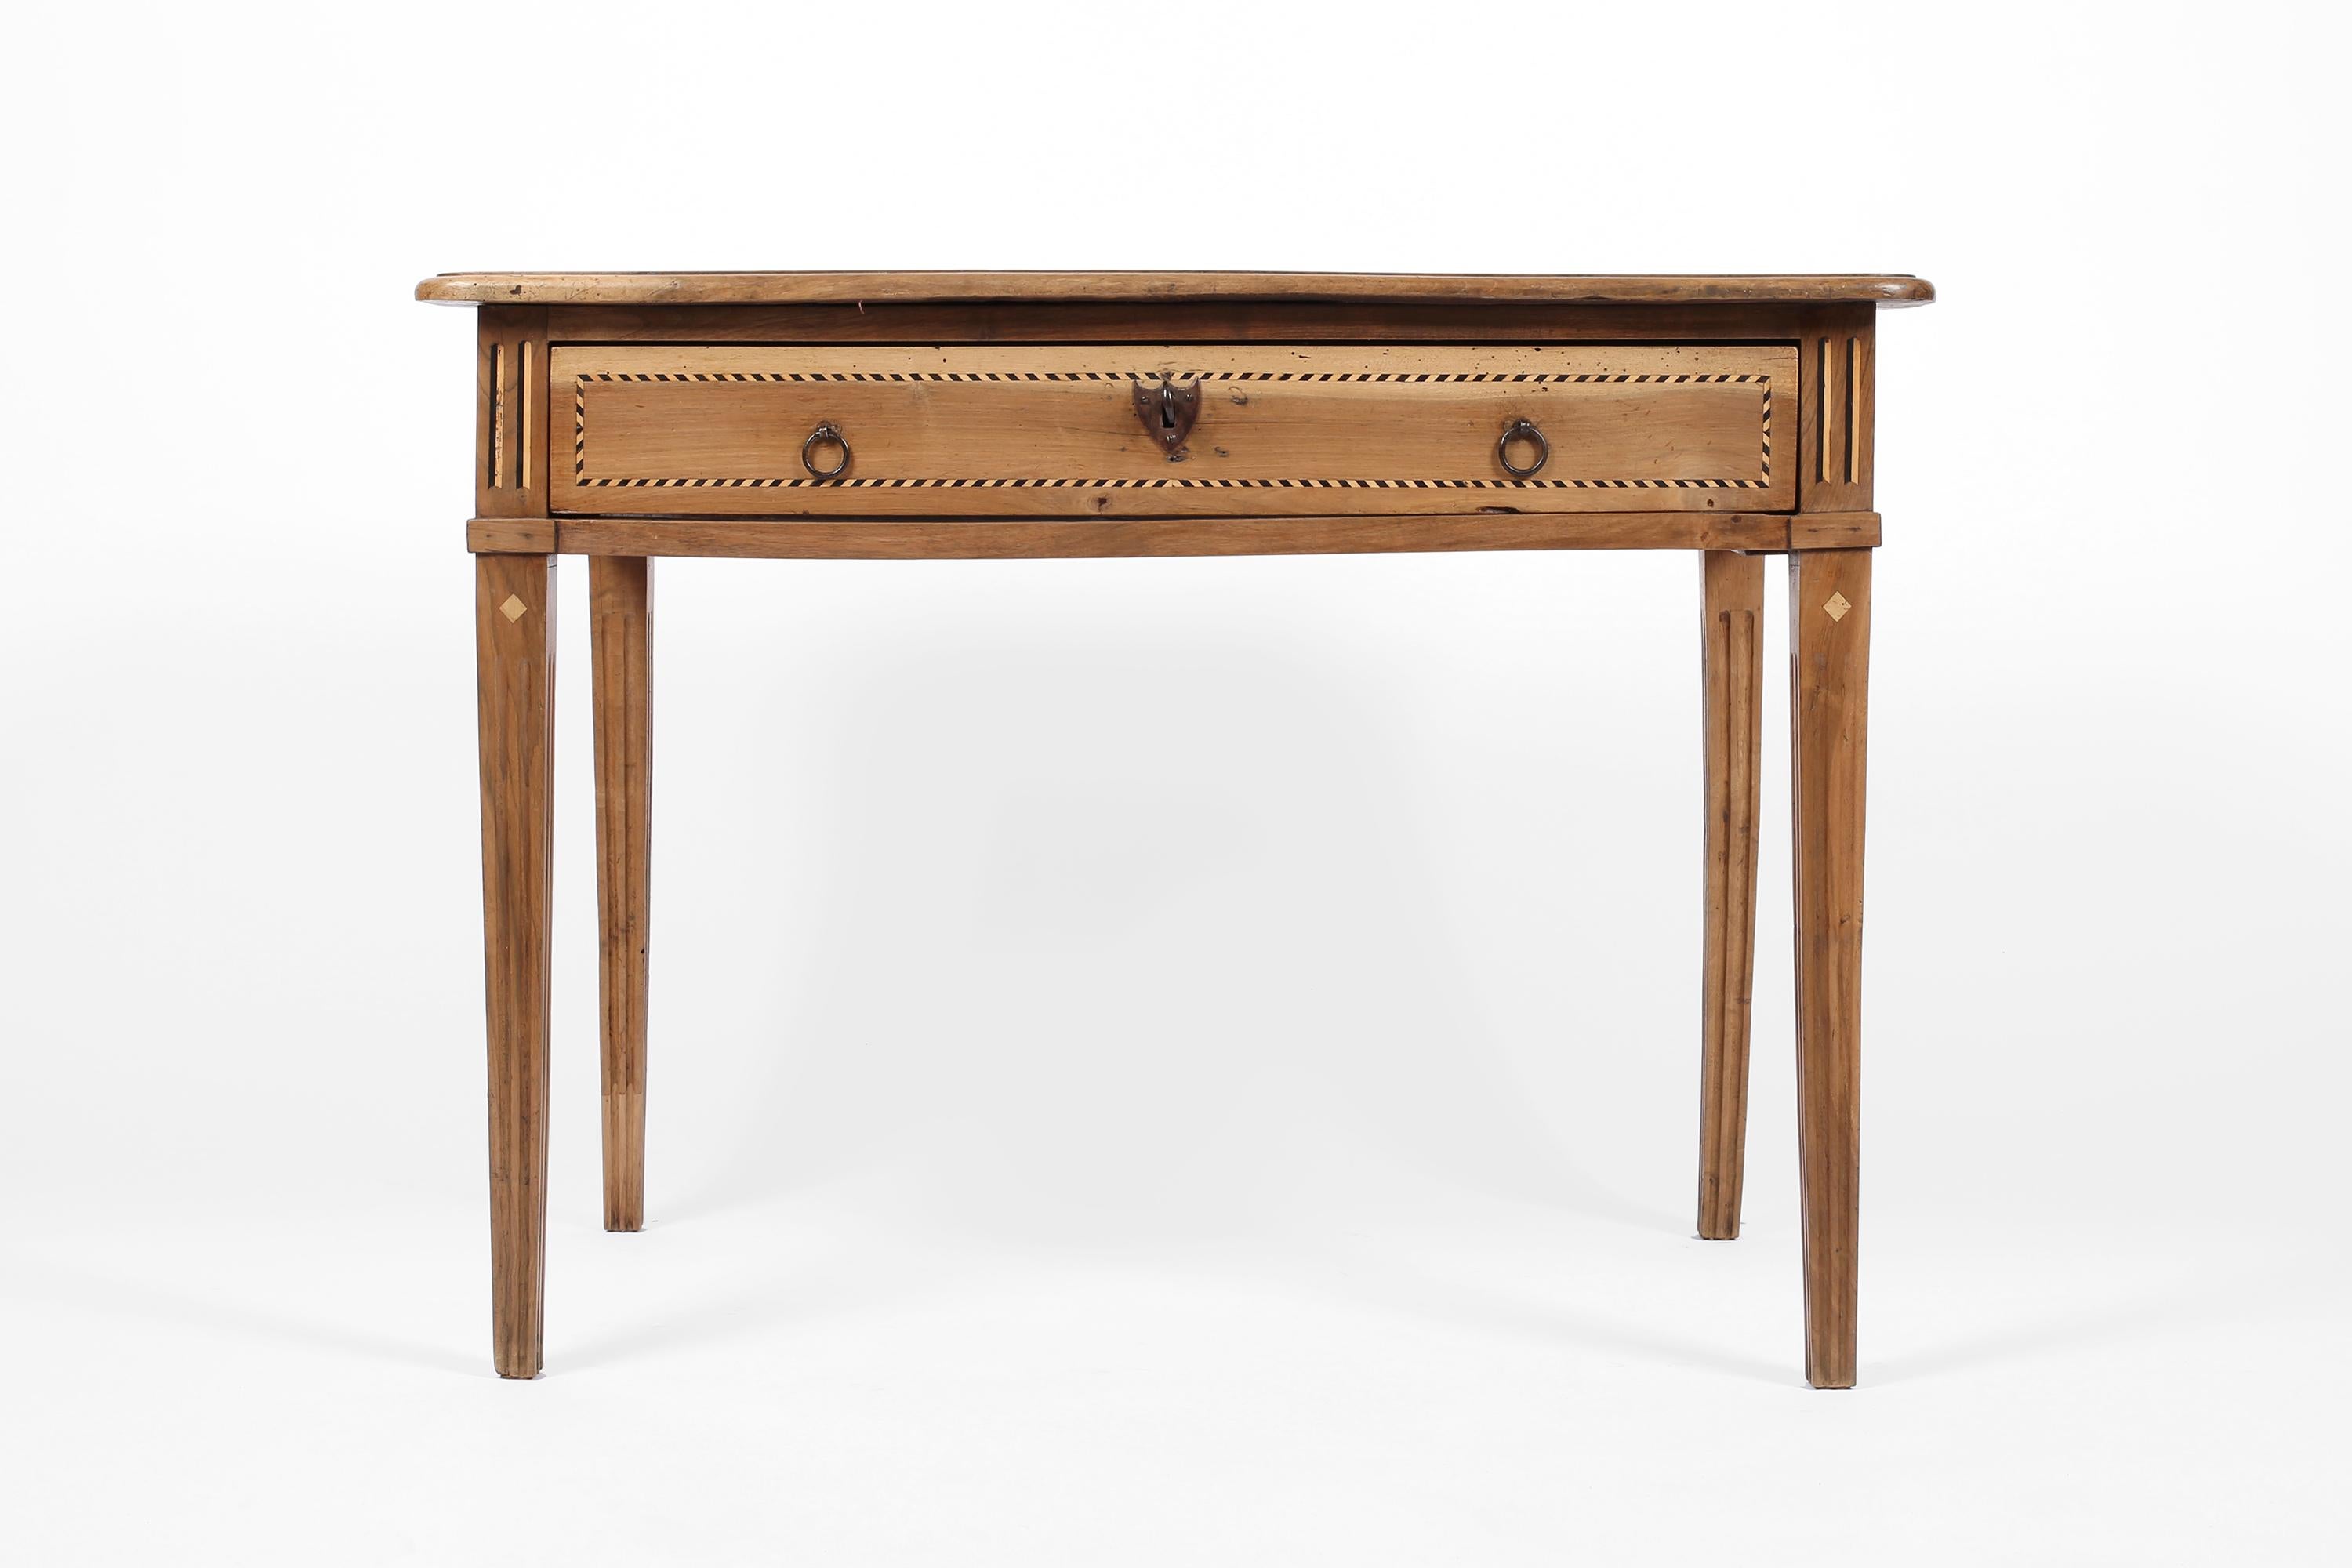 A fine Charles IV walnut writing desk/side table with decorative inlaid marquetry work in blonde wood and ebony. Featuring forged iron hardware to the single large drawer, with working original lock and key. Spanish, c. 1790.